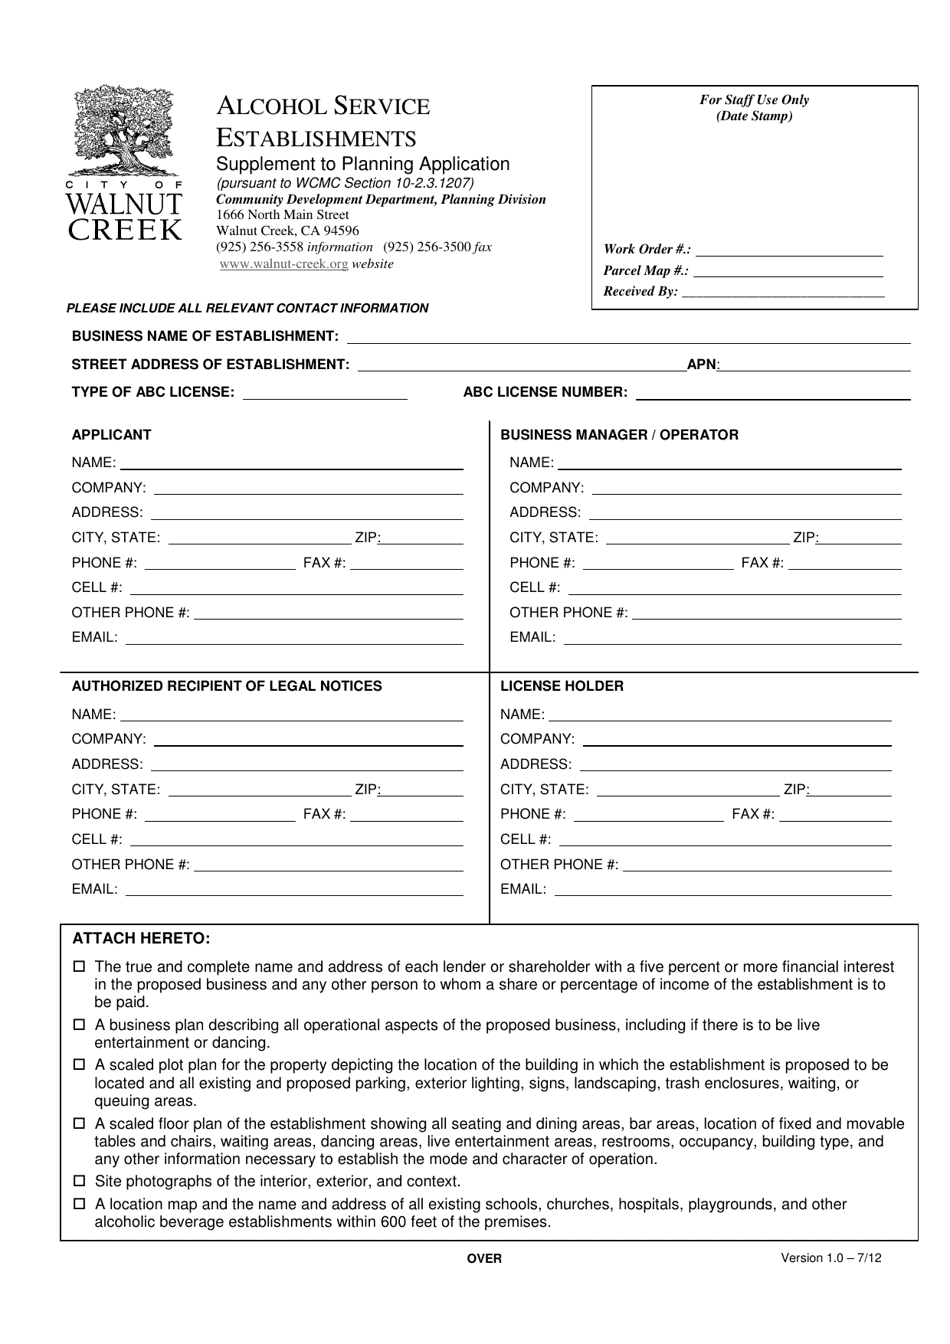 Supplement to Planning Application - Alcohol Service Establishments - City of Walnut Creek, California, Page 1